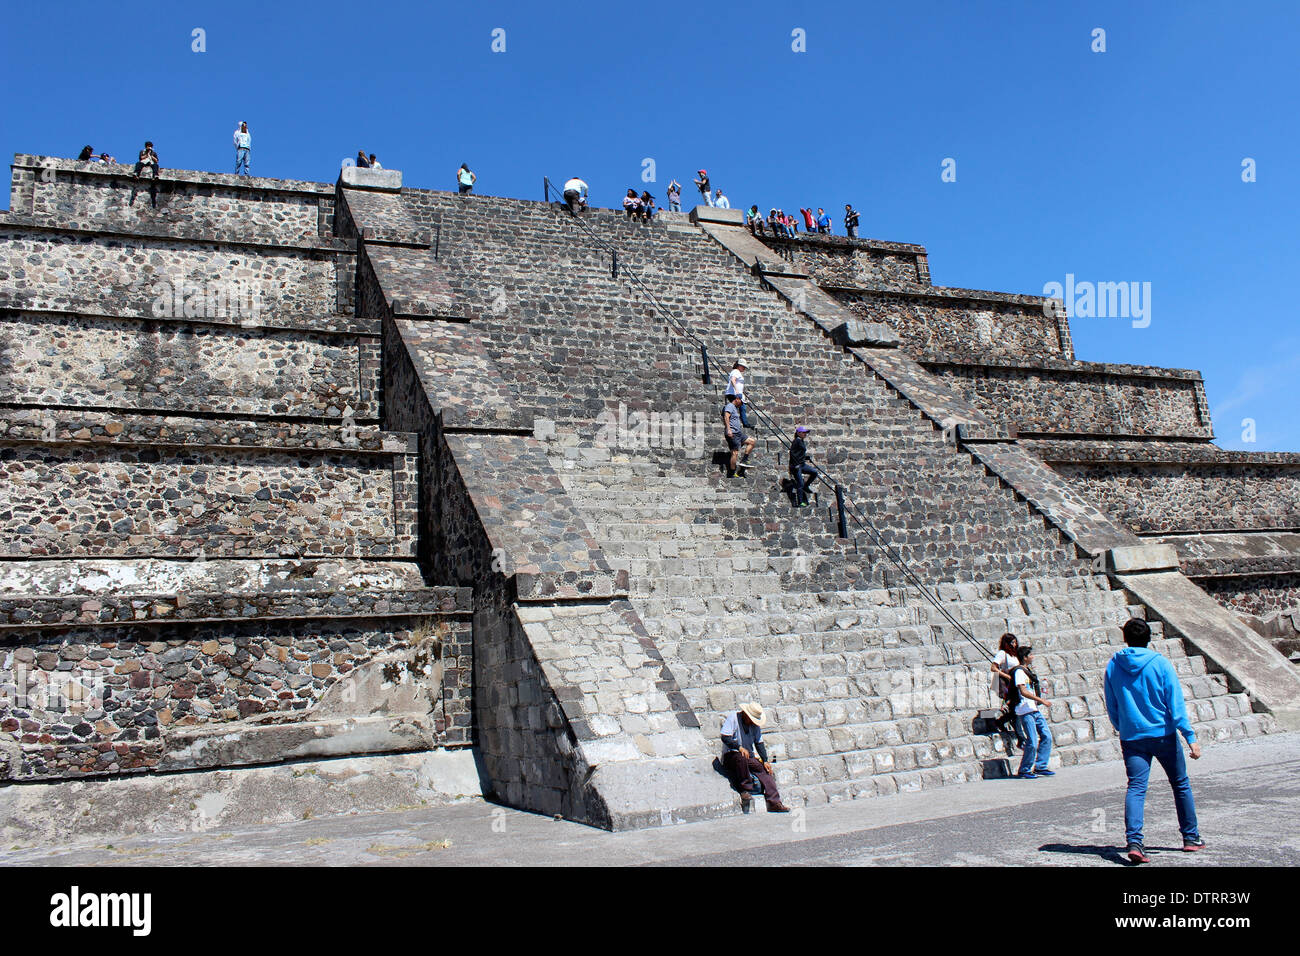 Stone steps leading up the first part of the Moon Pyramid, Teotihuacan Pyramids, Mexico - ancient Aztec site Stock Photo